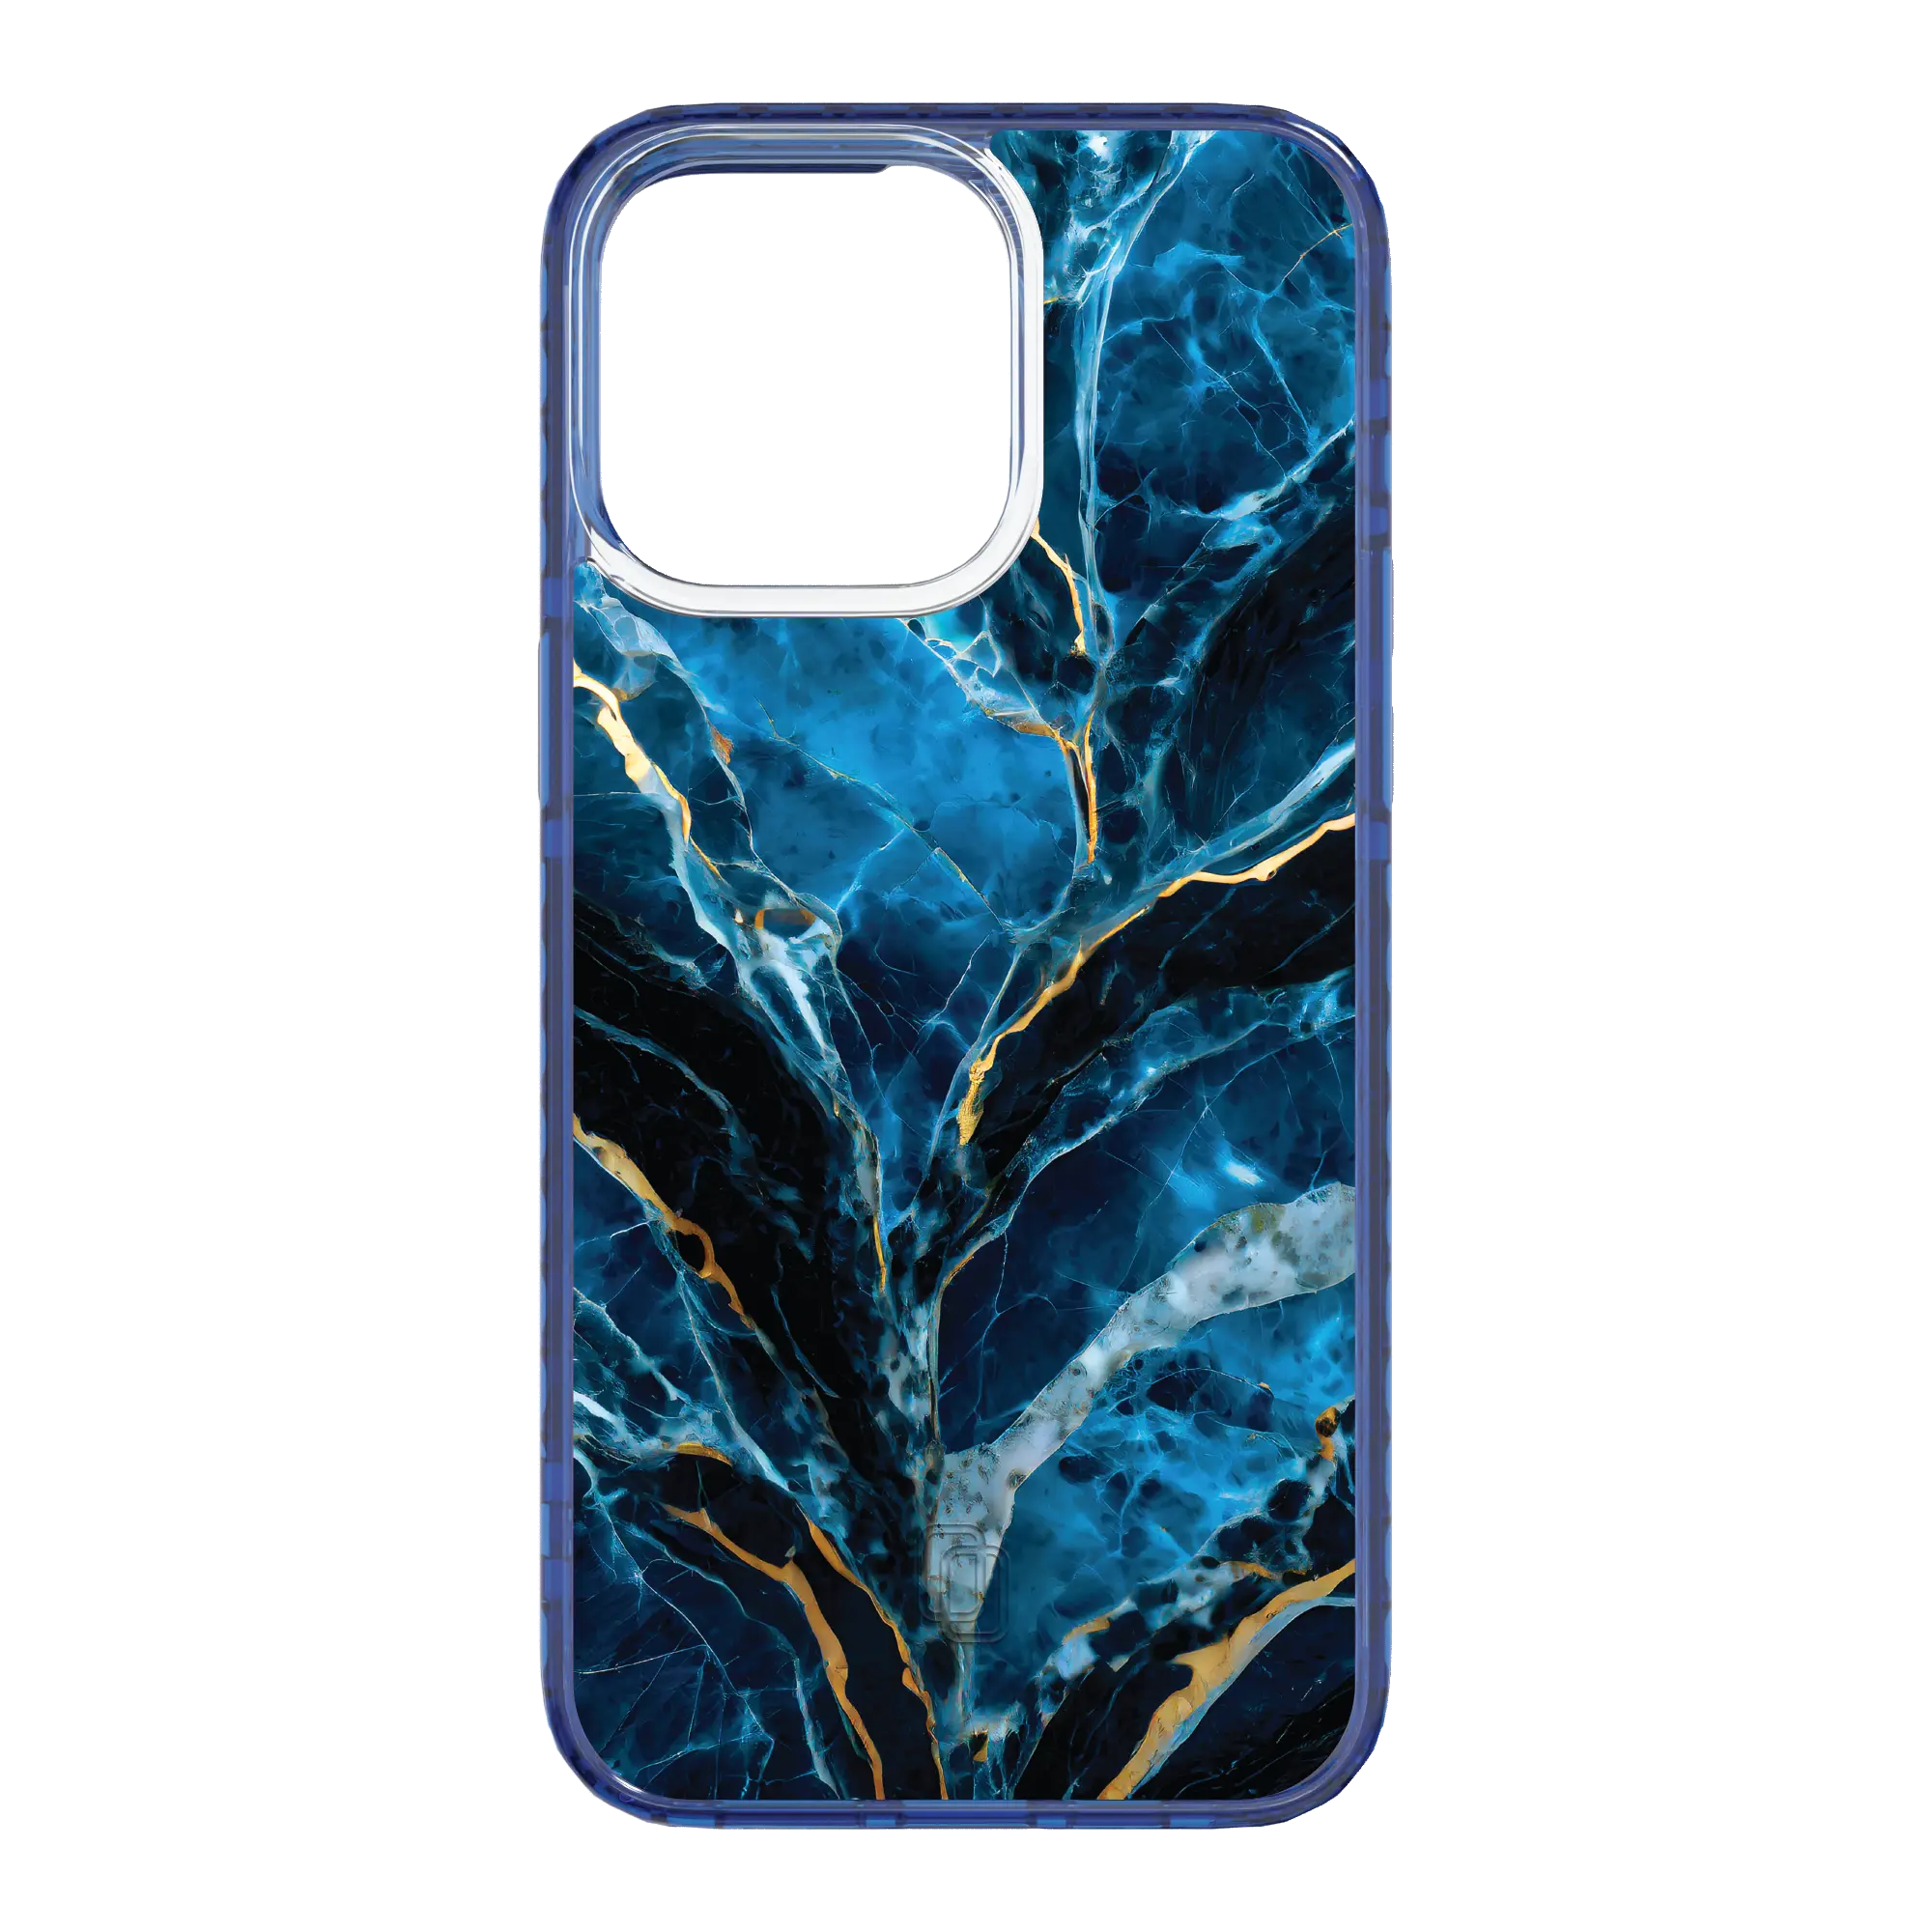 Apple-iPhone-15-Pro-Max-Bermuda-Blue Deep Sea | Protective MagSafe Case | Marble Stone Series for Apple iPhone 15 Series cellhelmet cellhelmet